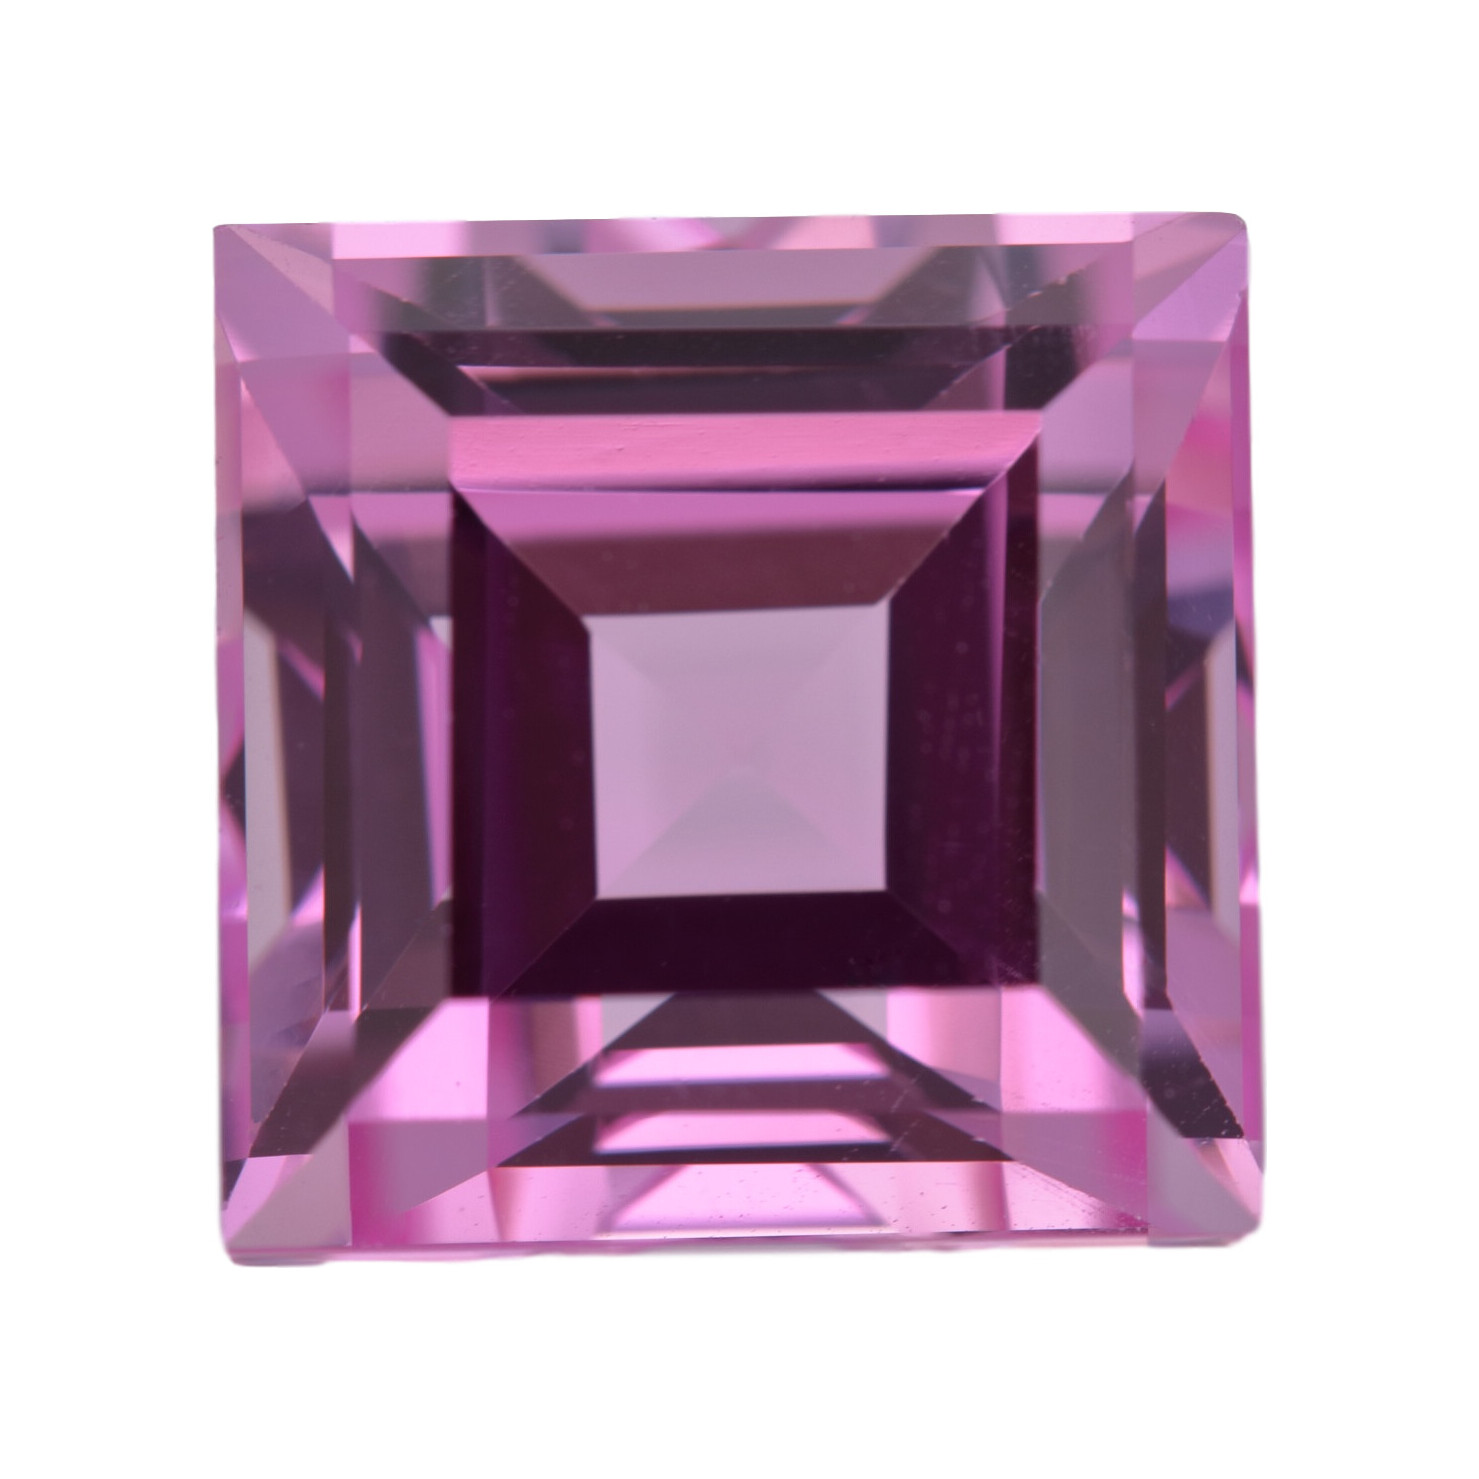 Details about   Round Cut 77 Ct/8 mm Pink Sapphire Natural Gemstone 32 Pcs Lot AGI Certified 